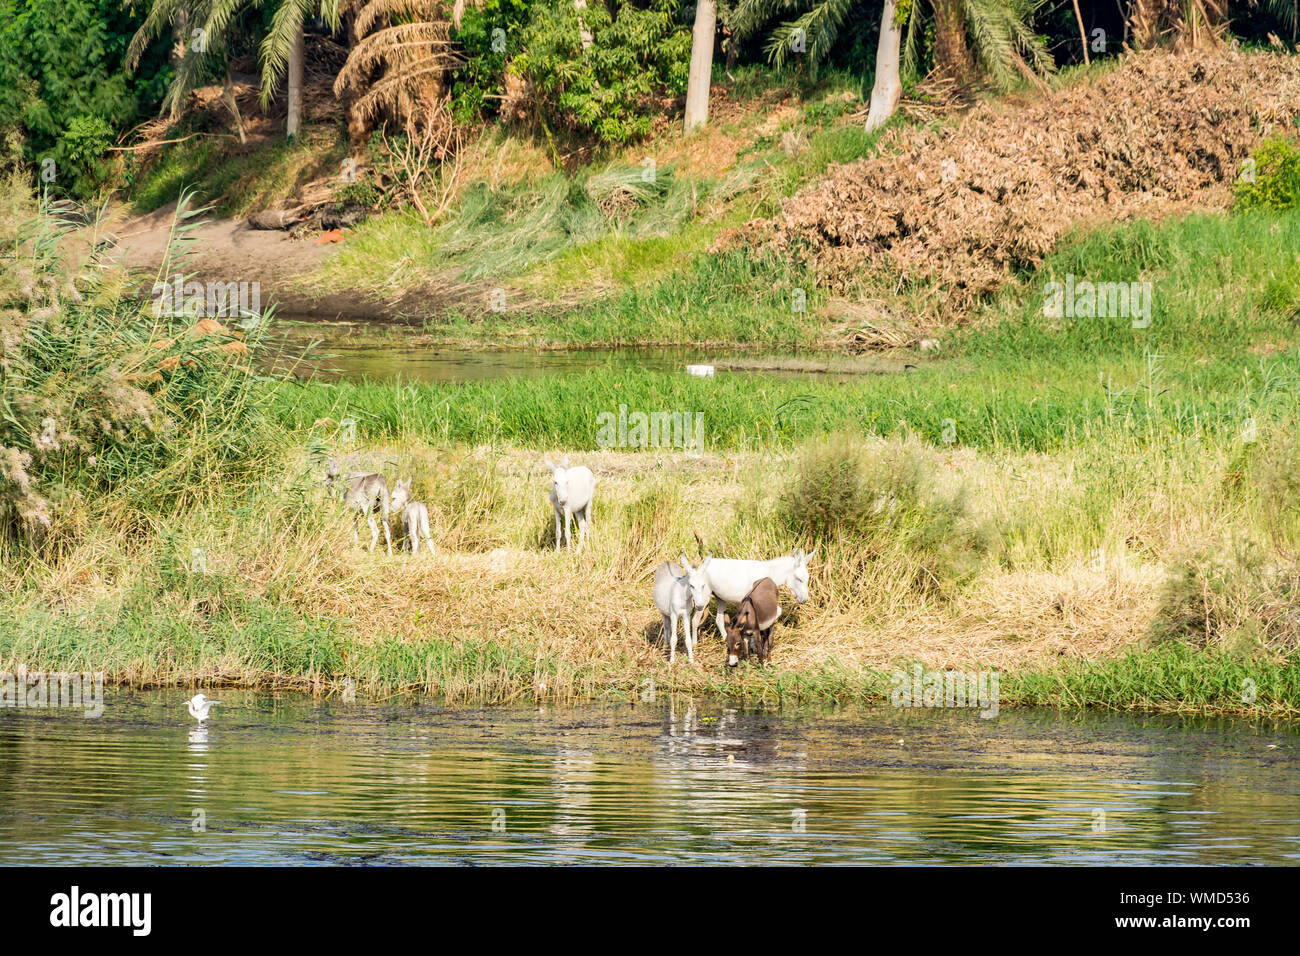 Cattle or livestock grazing on the bank of Nile river, Egypt Stock Photo